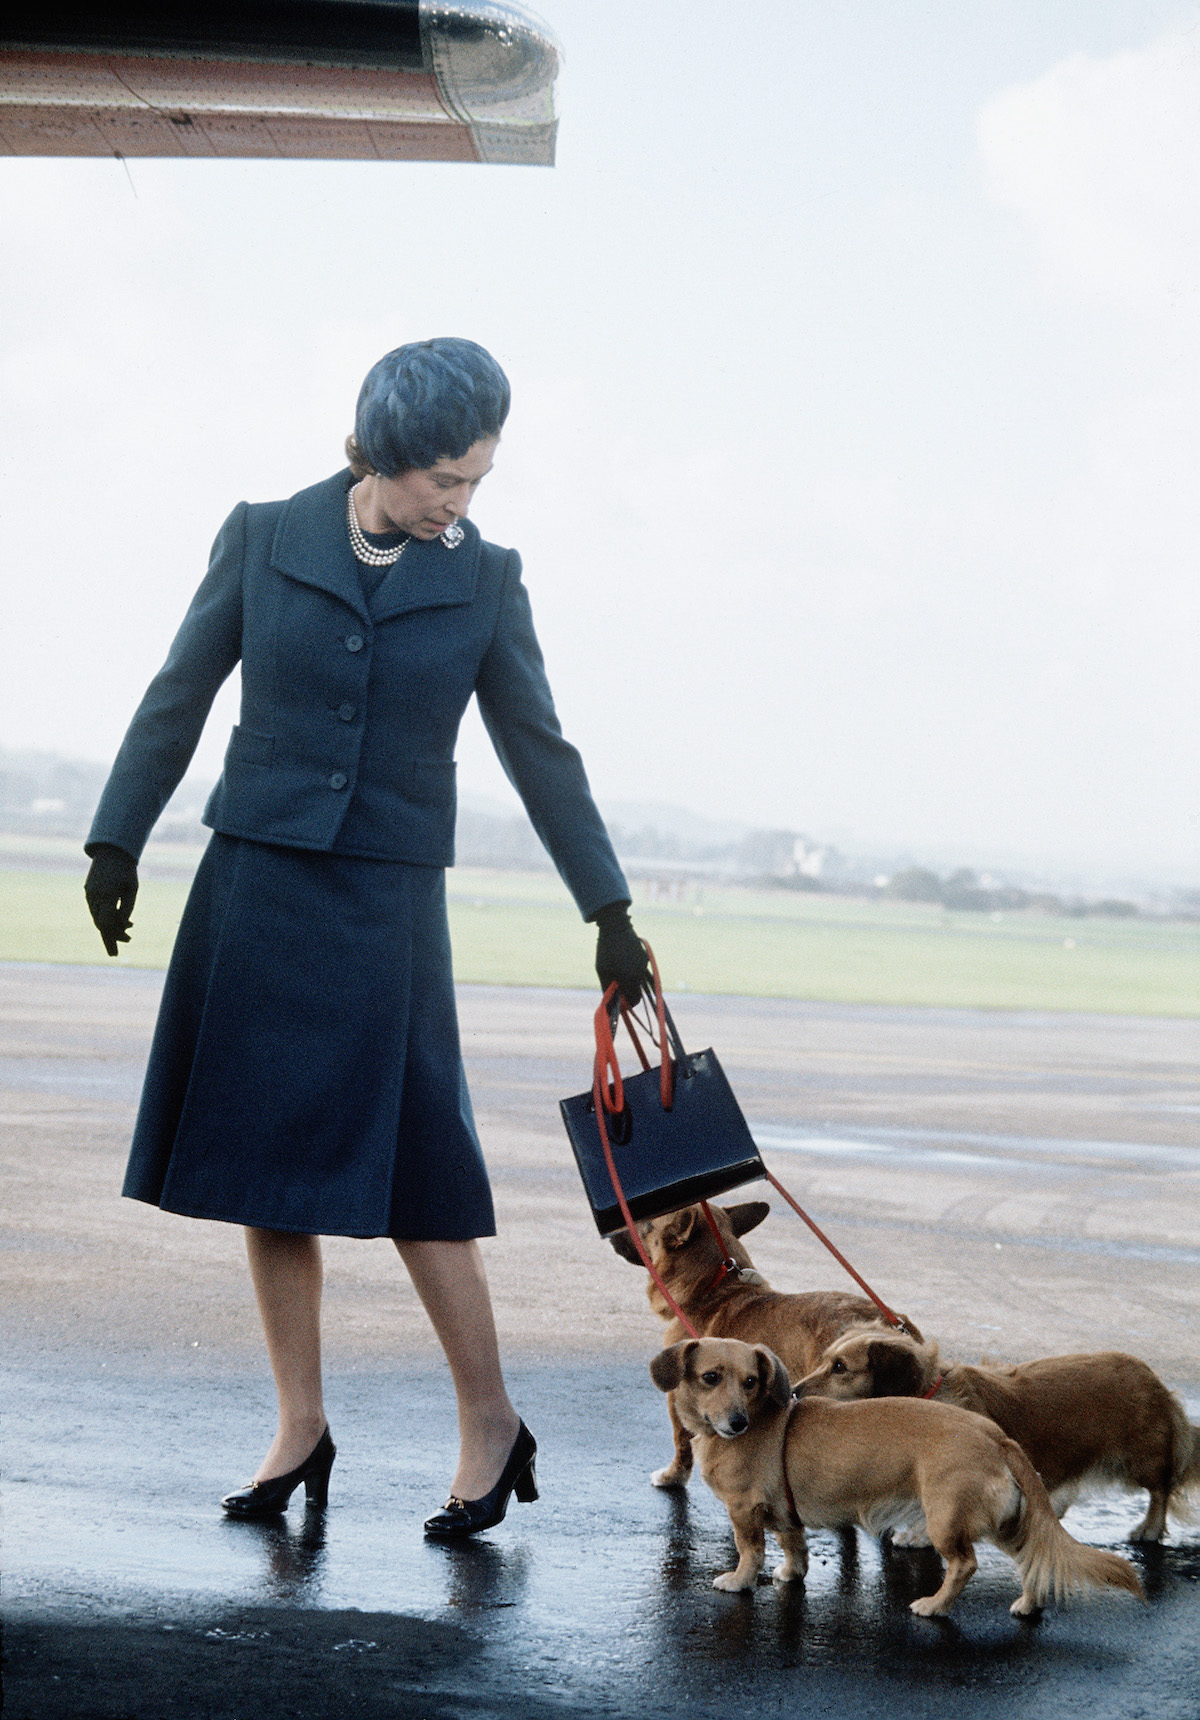 Queen Elizabeth II, whose reign appears in photos, walks with dogs